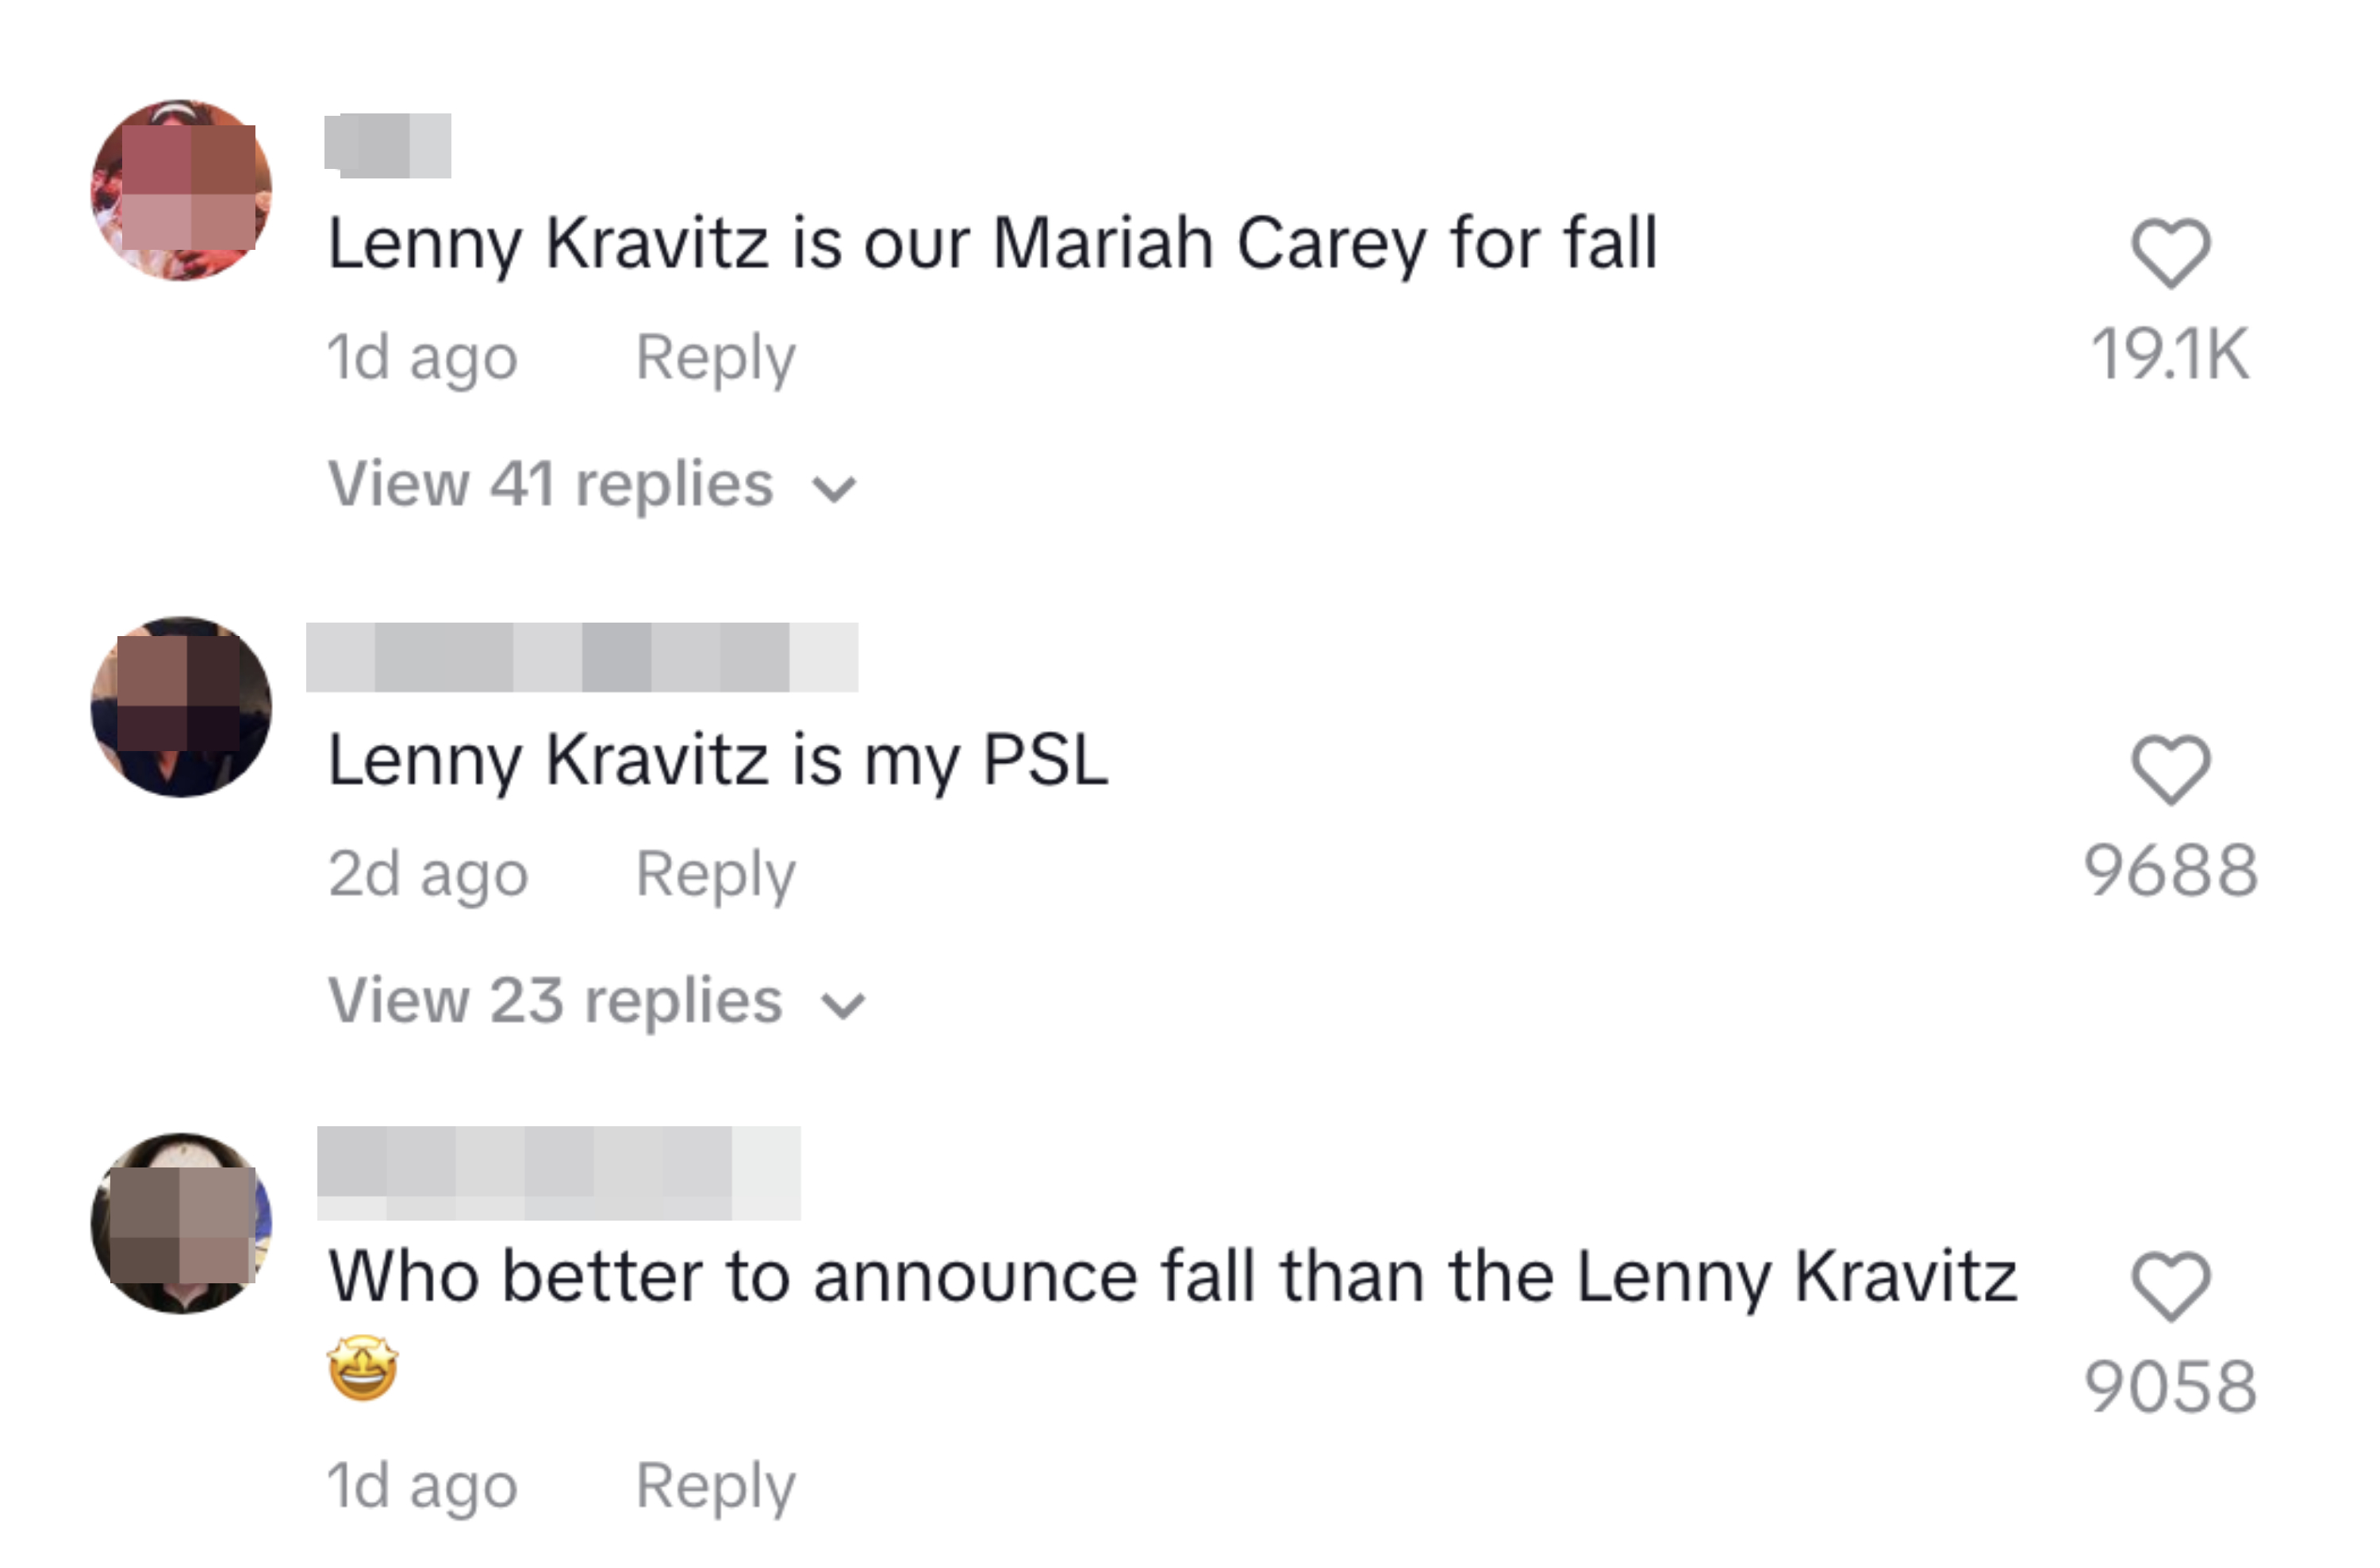 &quot;Lenny Kravitz is our Mariah Carey for fall&quot;